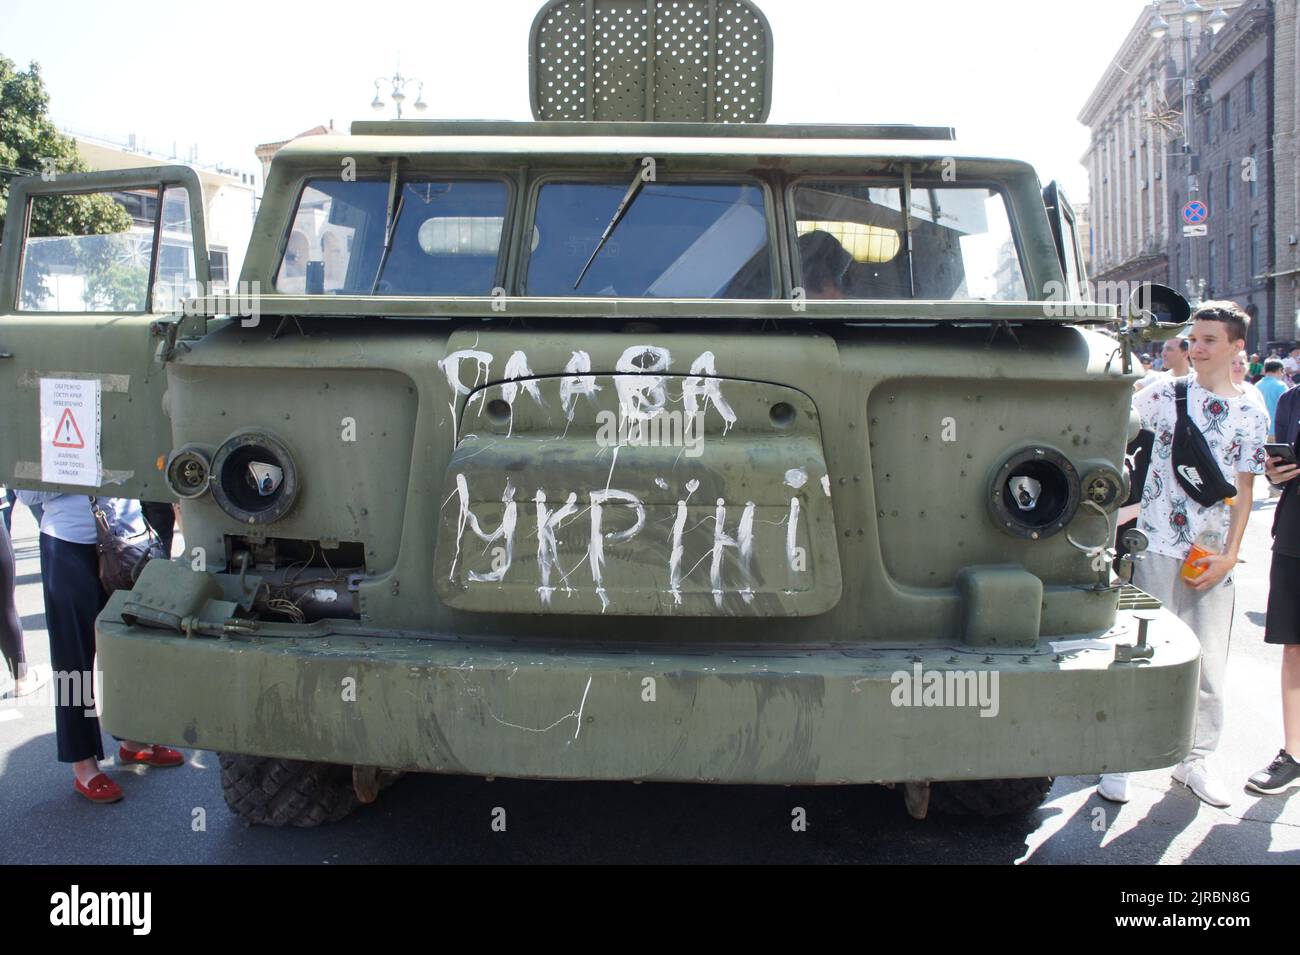 Kyiv, Kyiv Ukraine, August 21 2022: Russian military equipment destroyed. Display for Independence Day parade on Khreshchatyk street Stock Photo